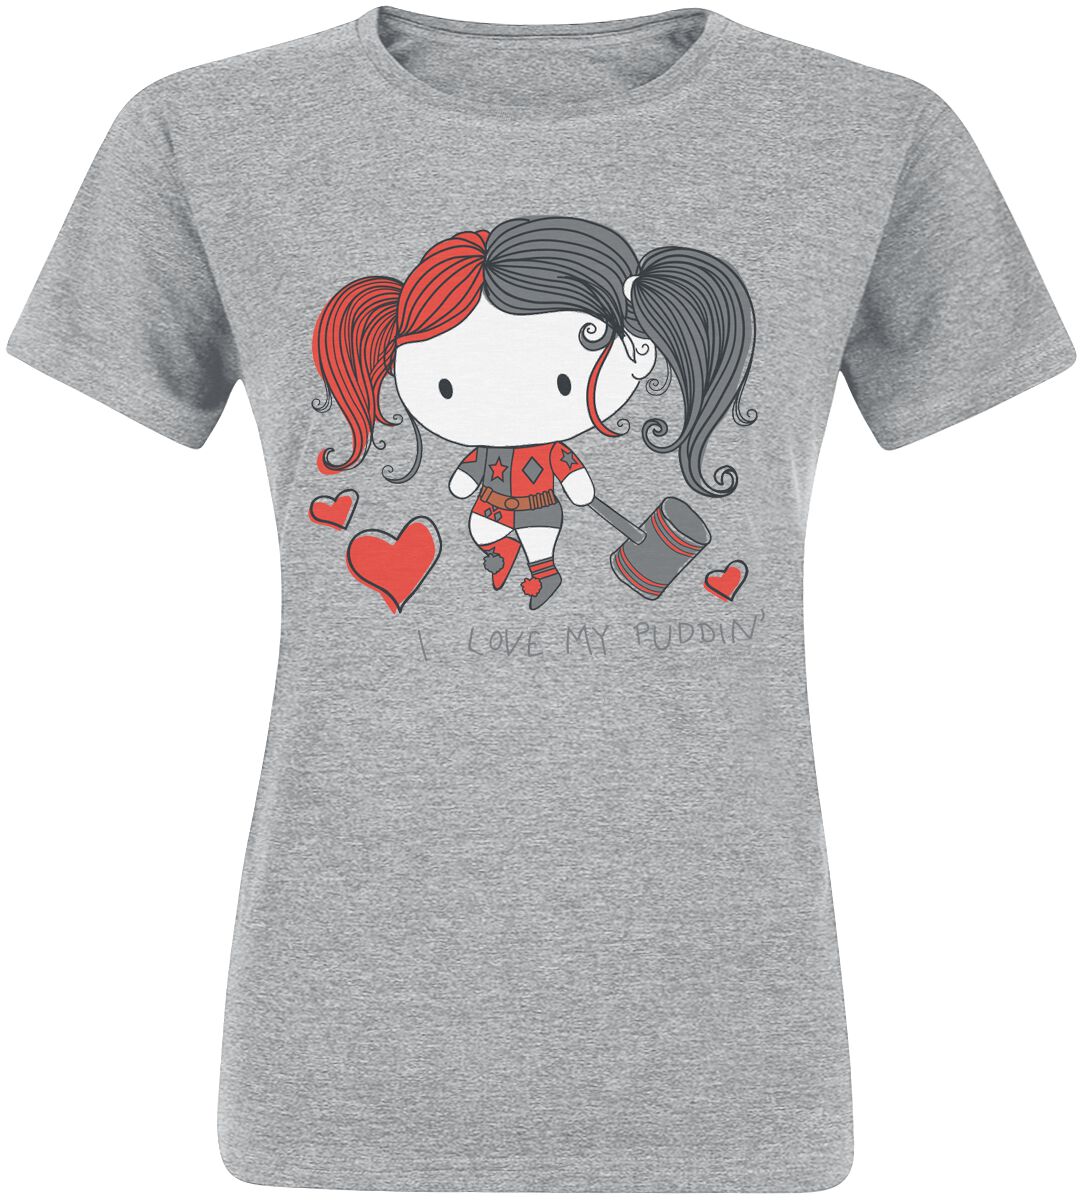 Suicide Squad I Love My Puddin T-Shirt heather grey